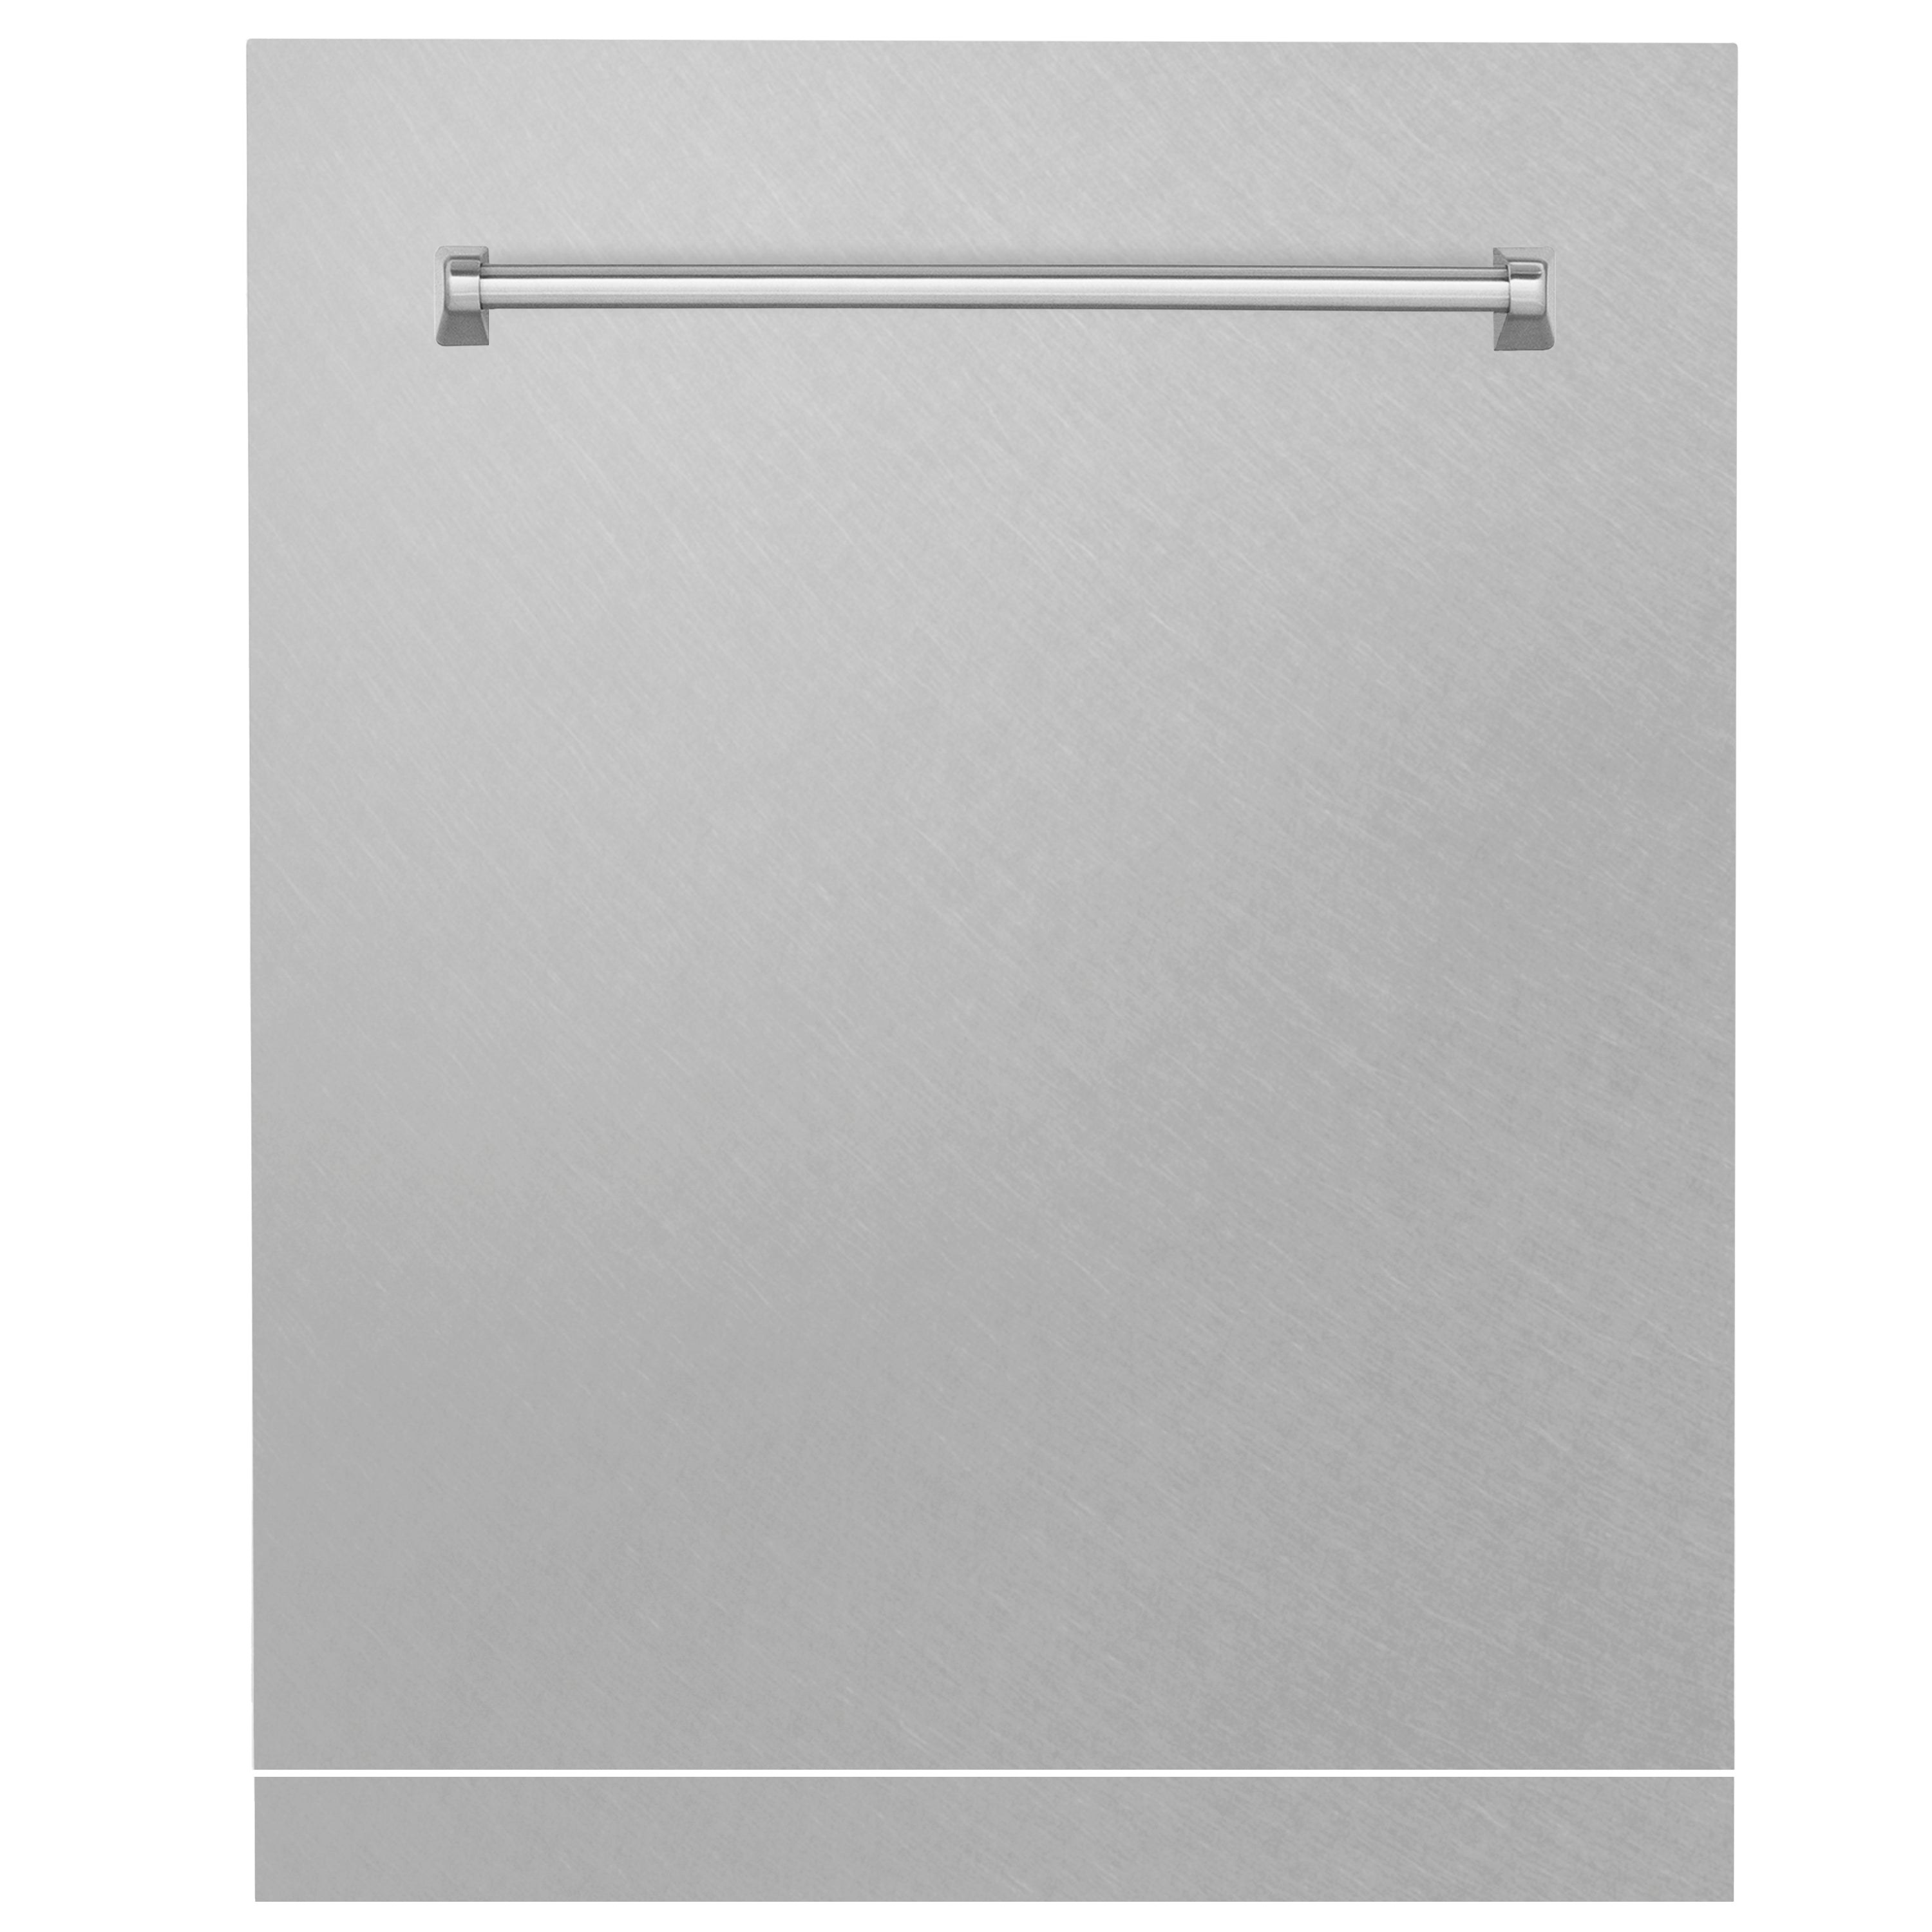 ZLINE 24" Monument Dishwasher Panel in Fingerprint Resistant Stainless Steel with Traditional Handle (DPMT-SN-24)